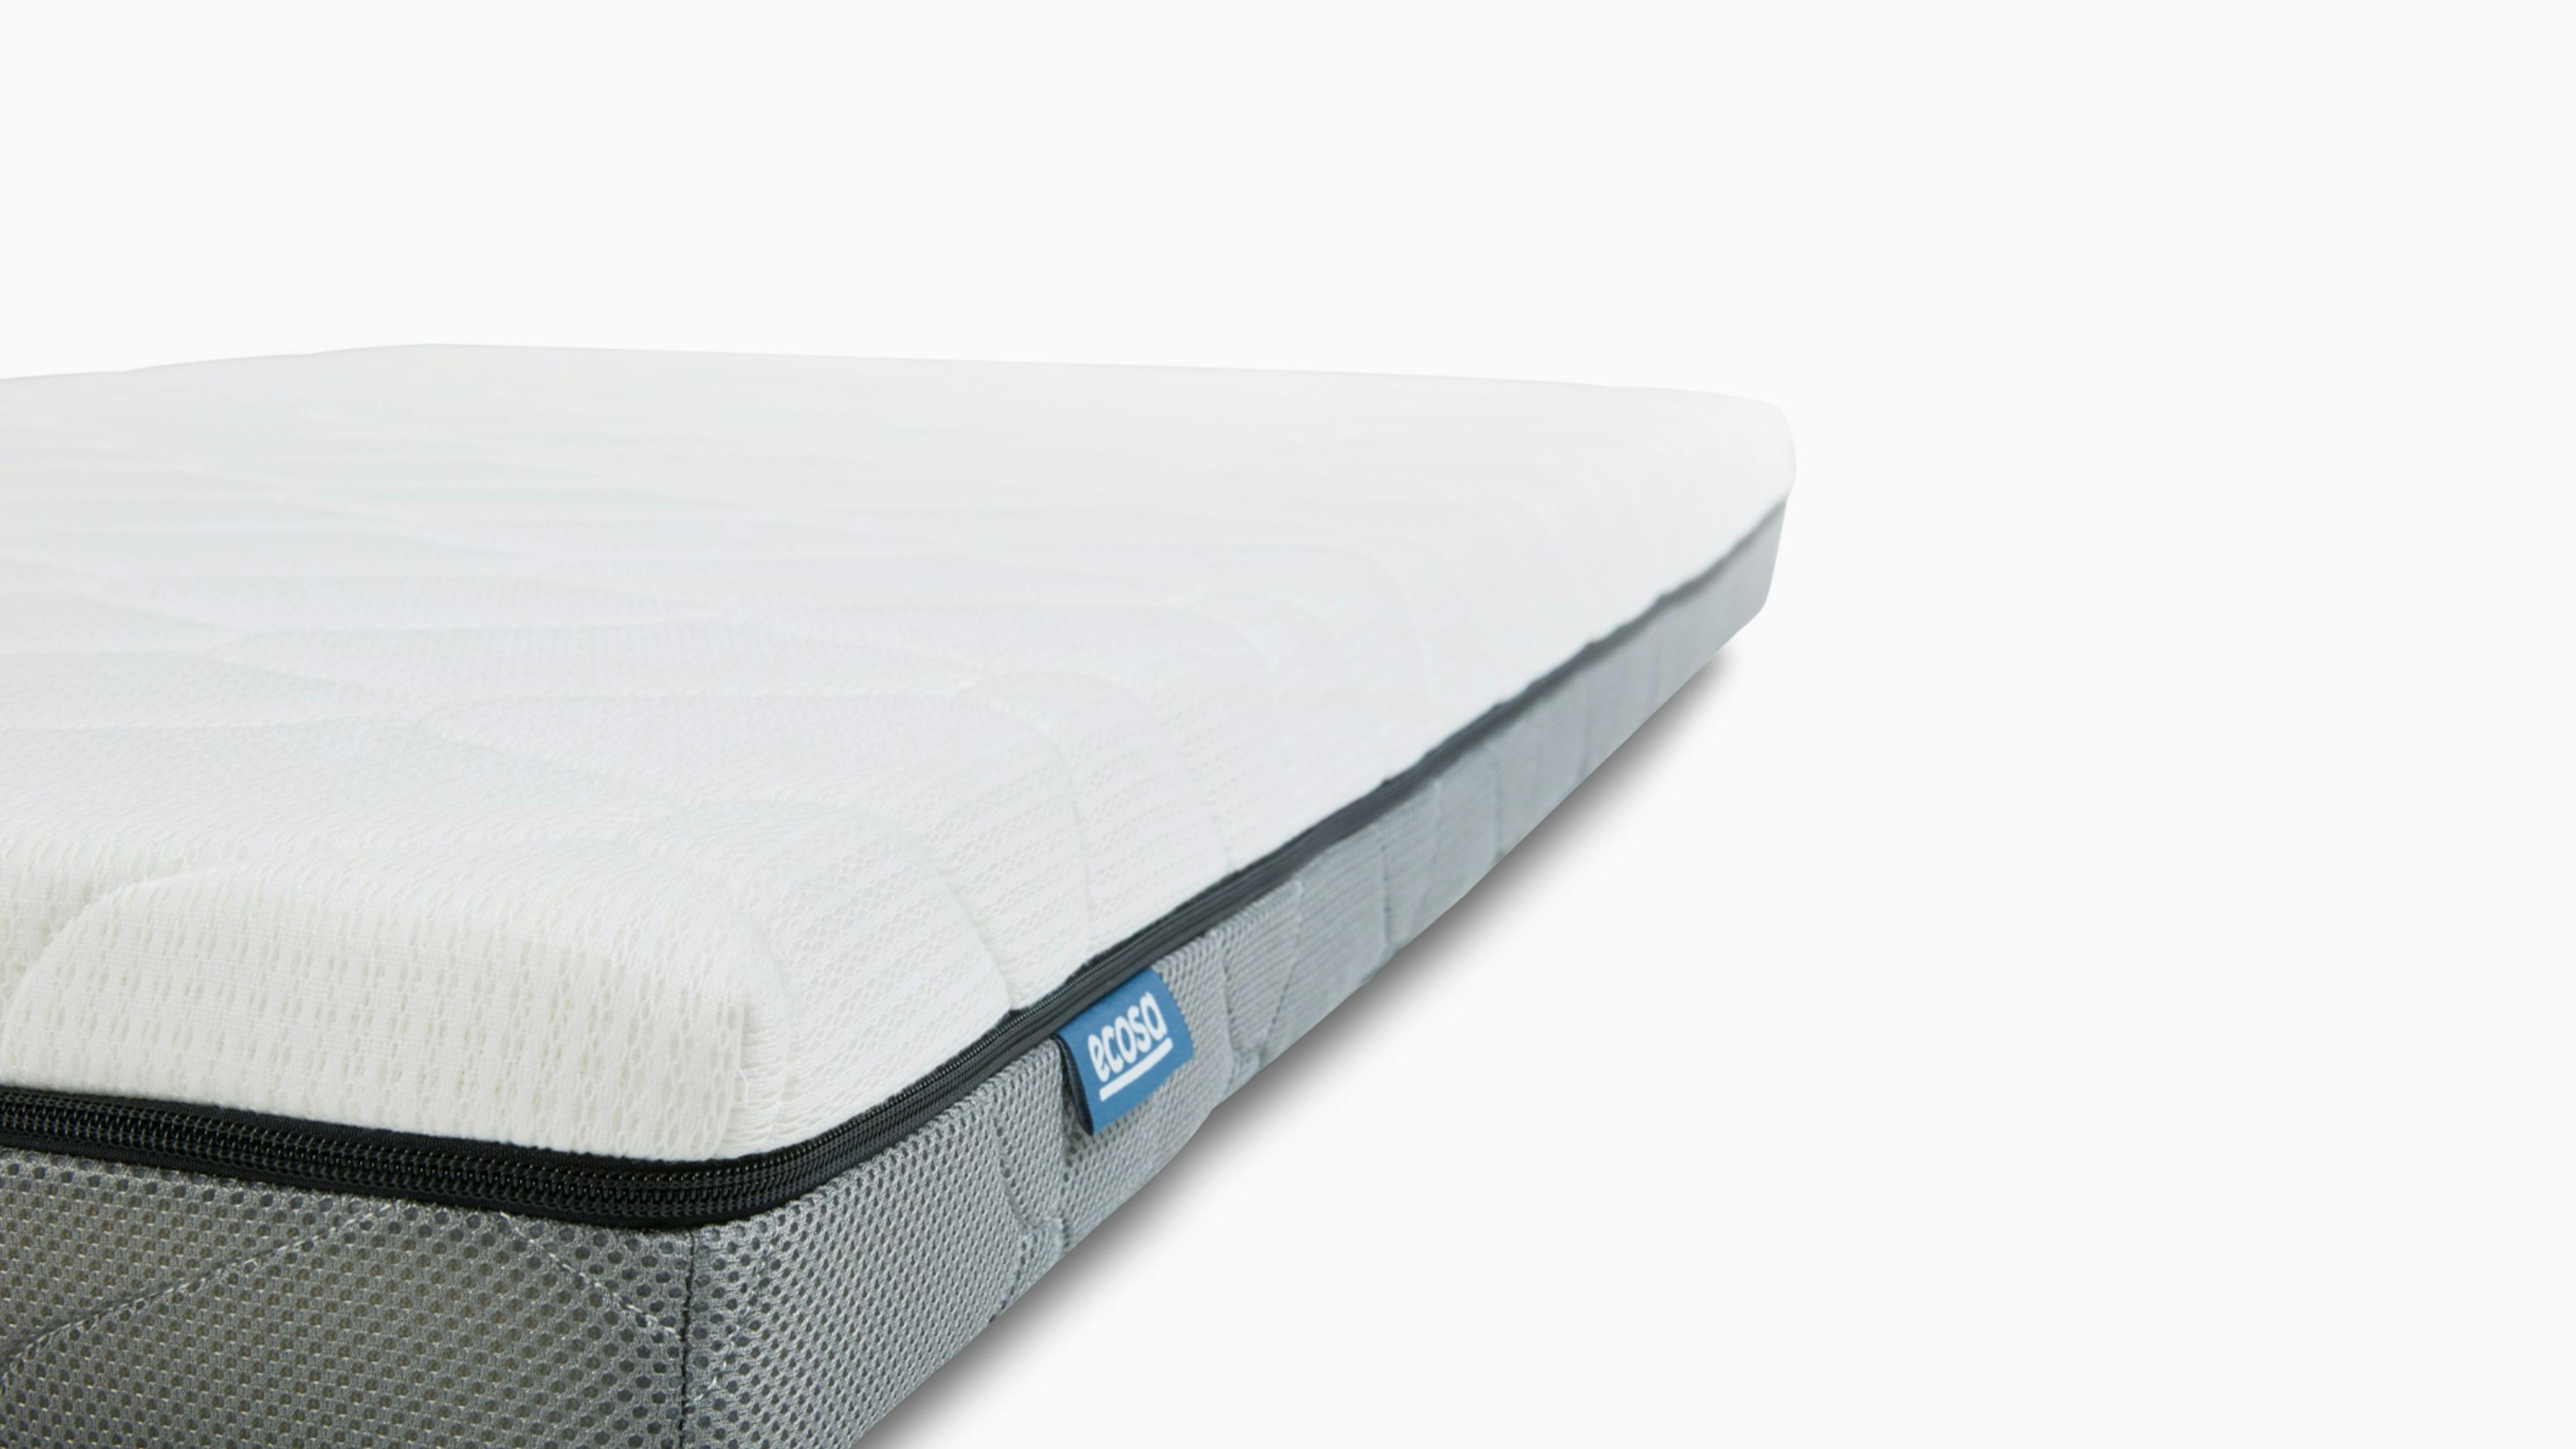 ecosa mattress topper product review